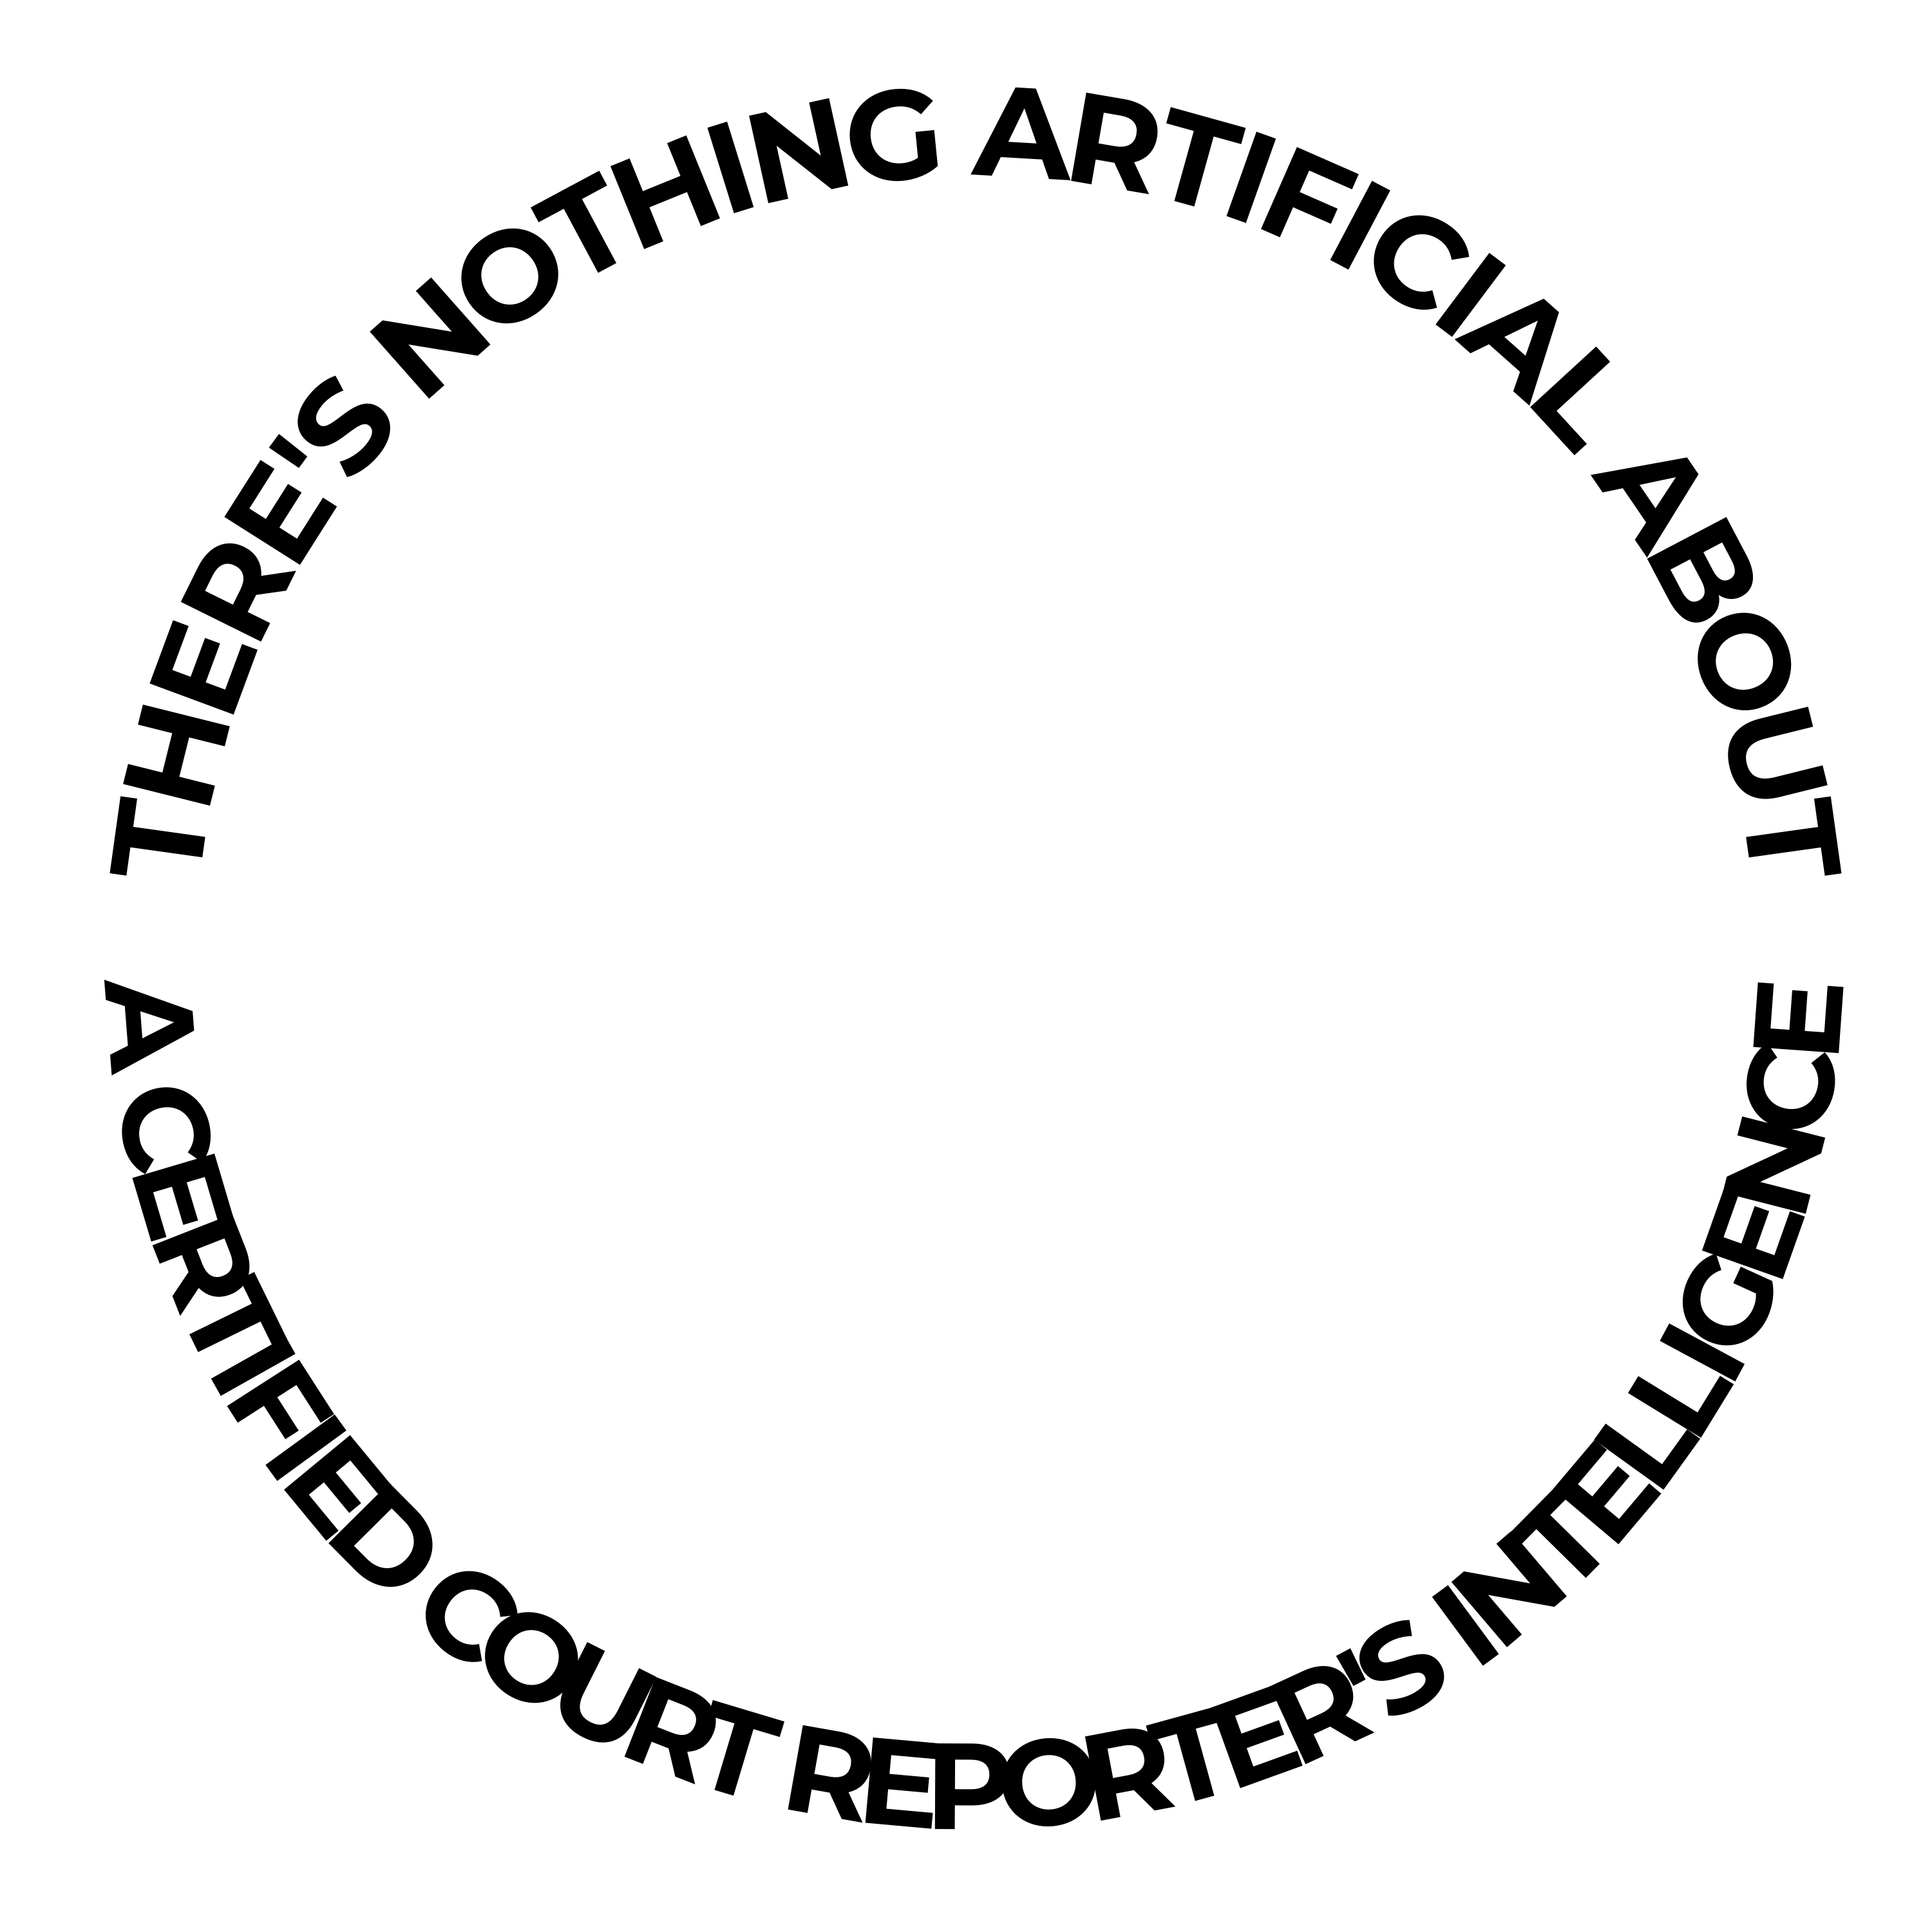 White Circle Frame that says There's nothing artificial about a certified court reporter's intelligence.